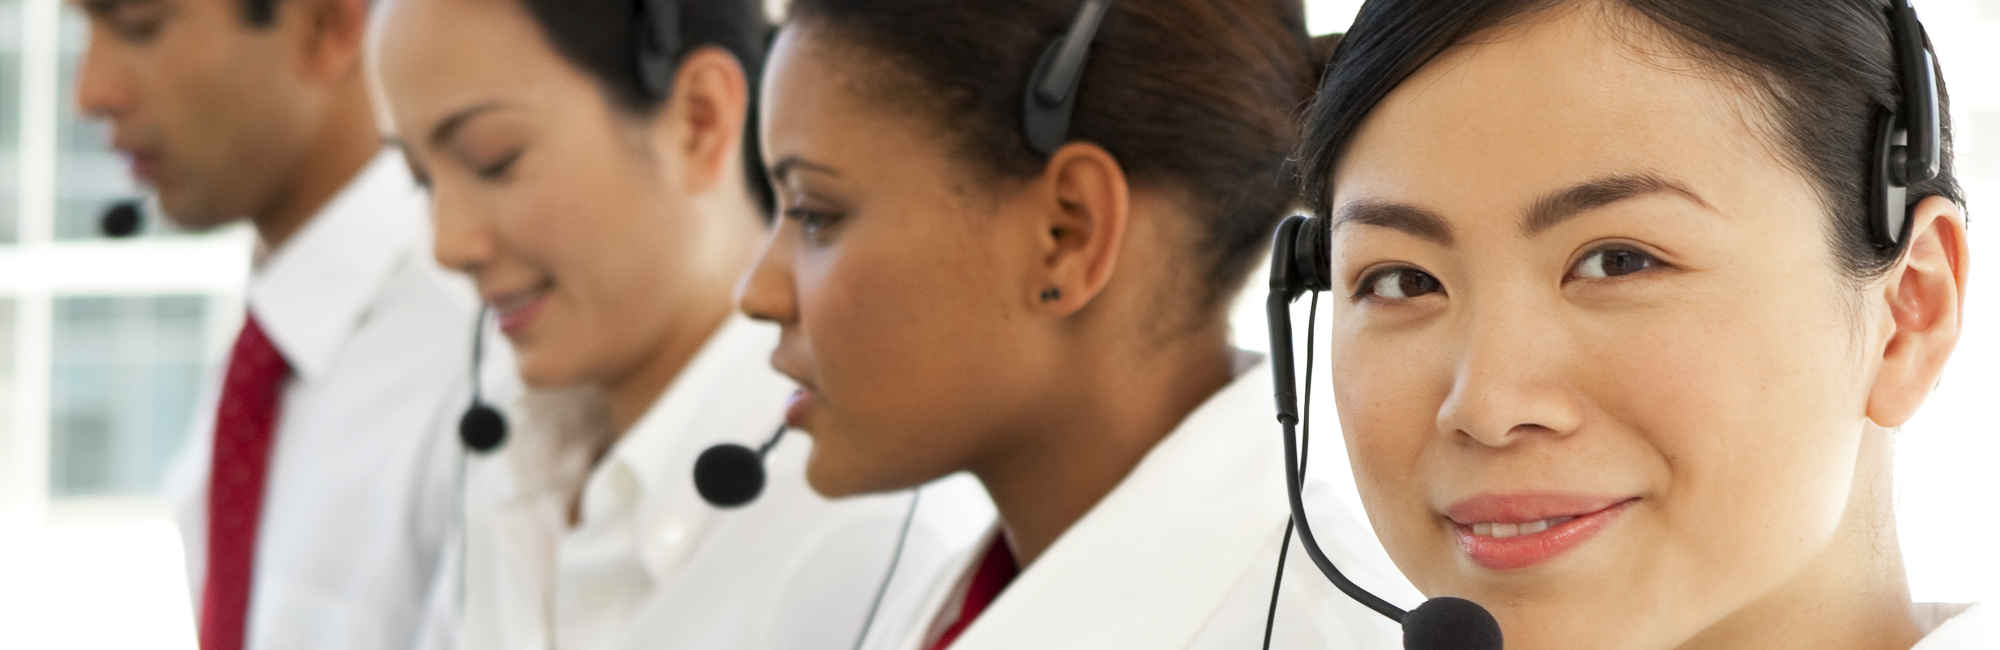 Call Center Employees with Headsets